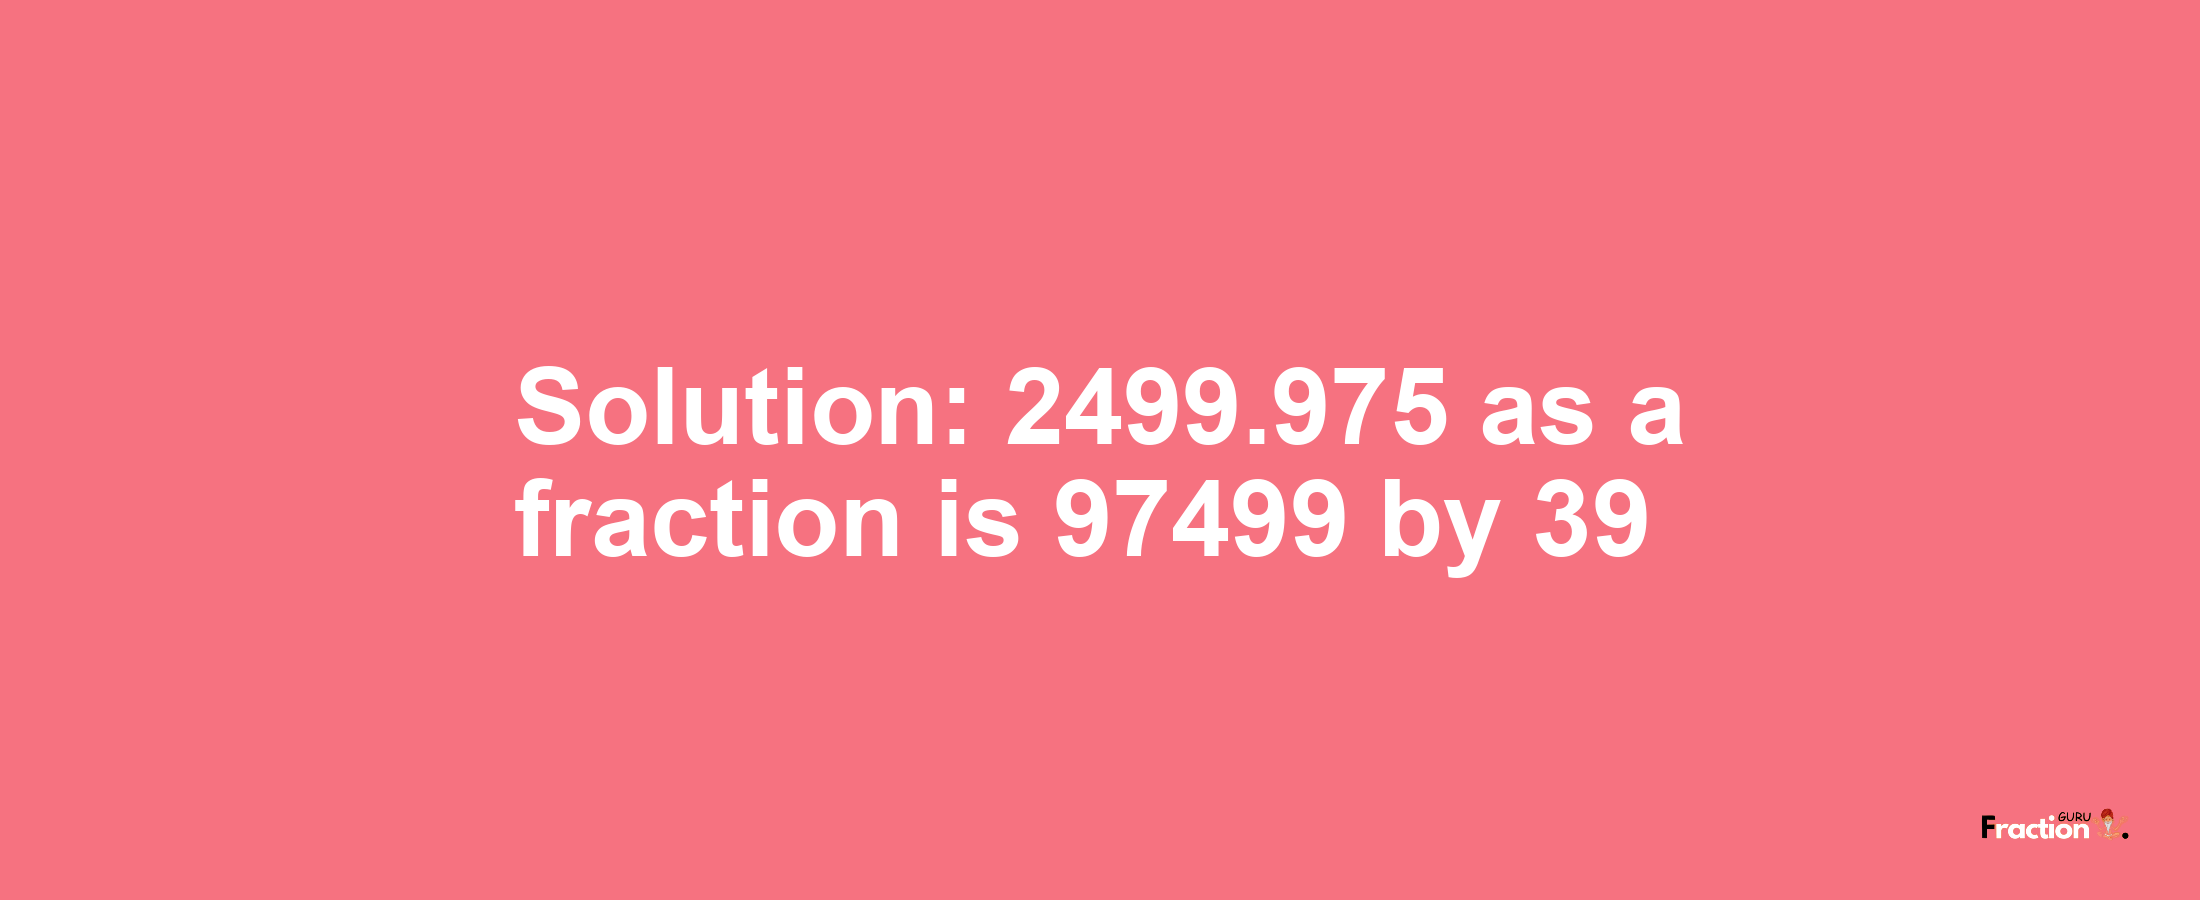 Solution:2499.975 as a fraction is 97499/39